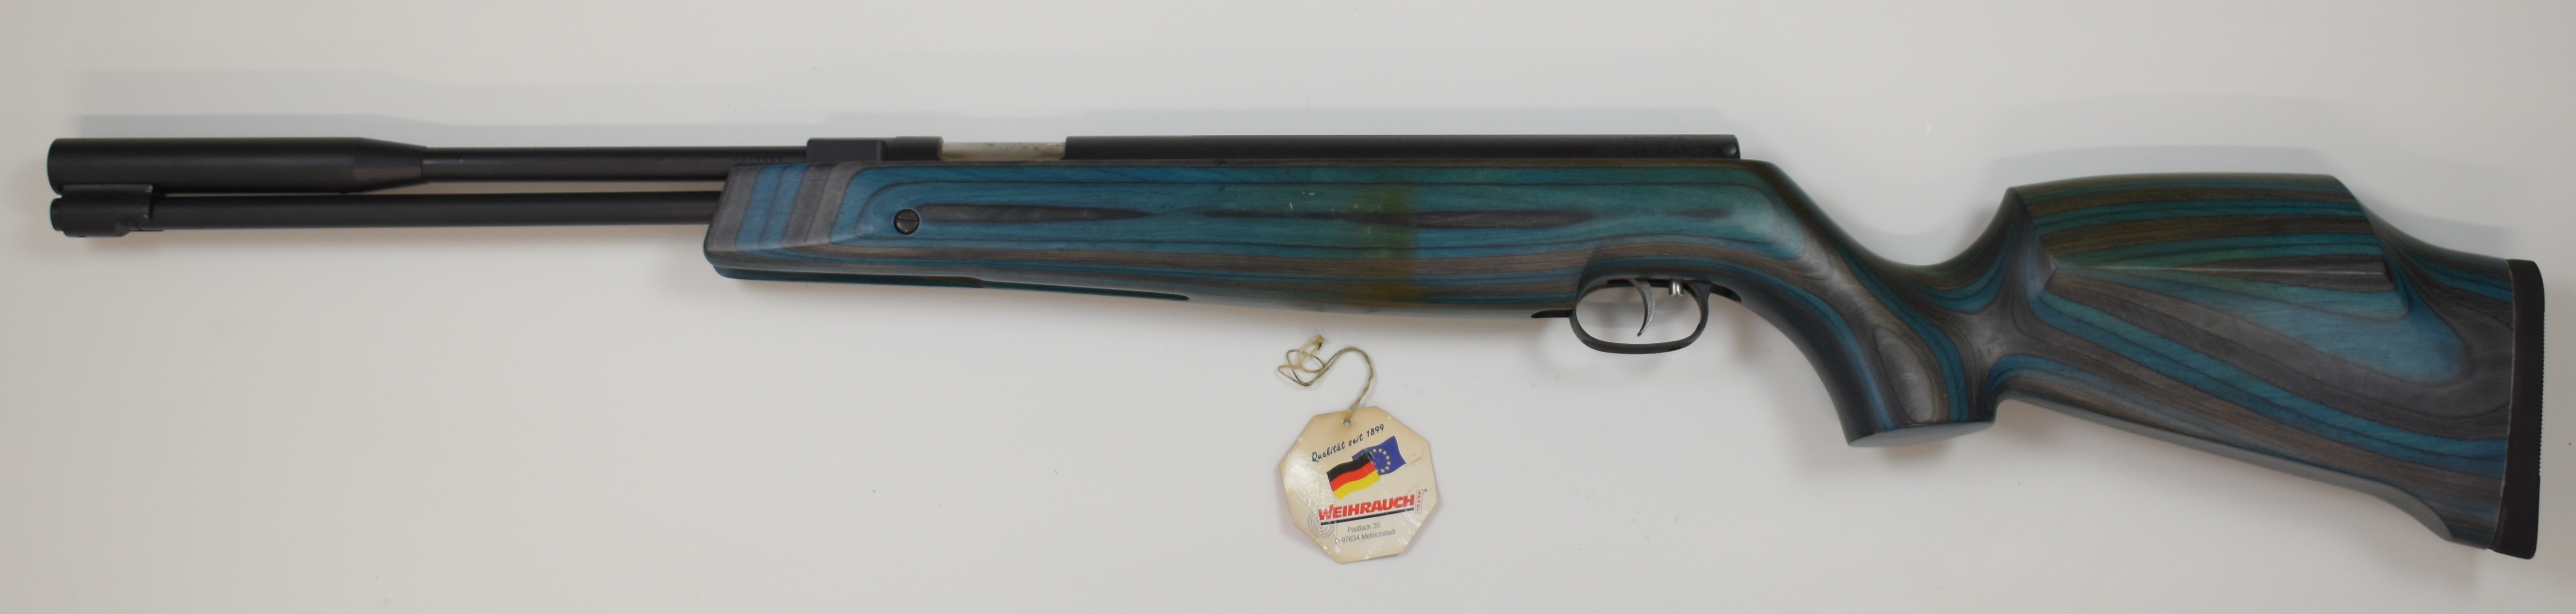 Weihrauch HW97K .177 underlever air rifle with blue laminated show wood stock, semi-pistol grip, - Image 7 of 10